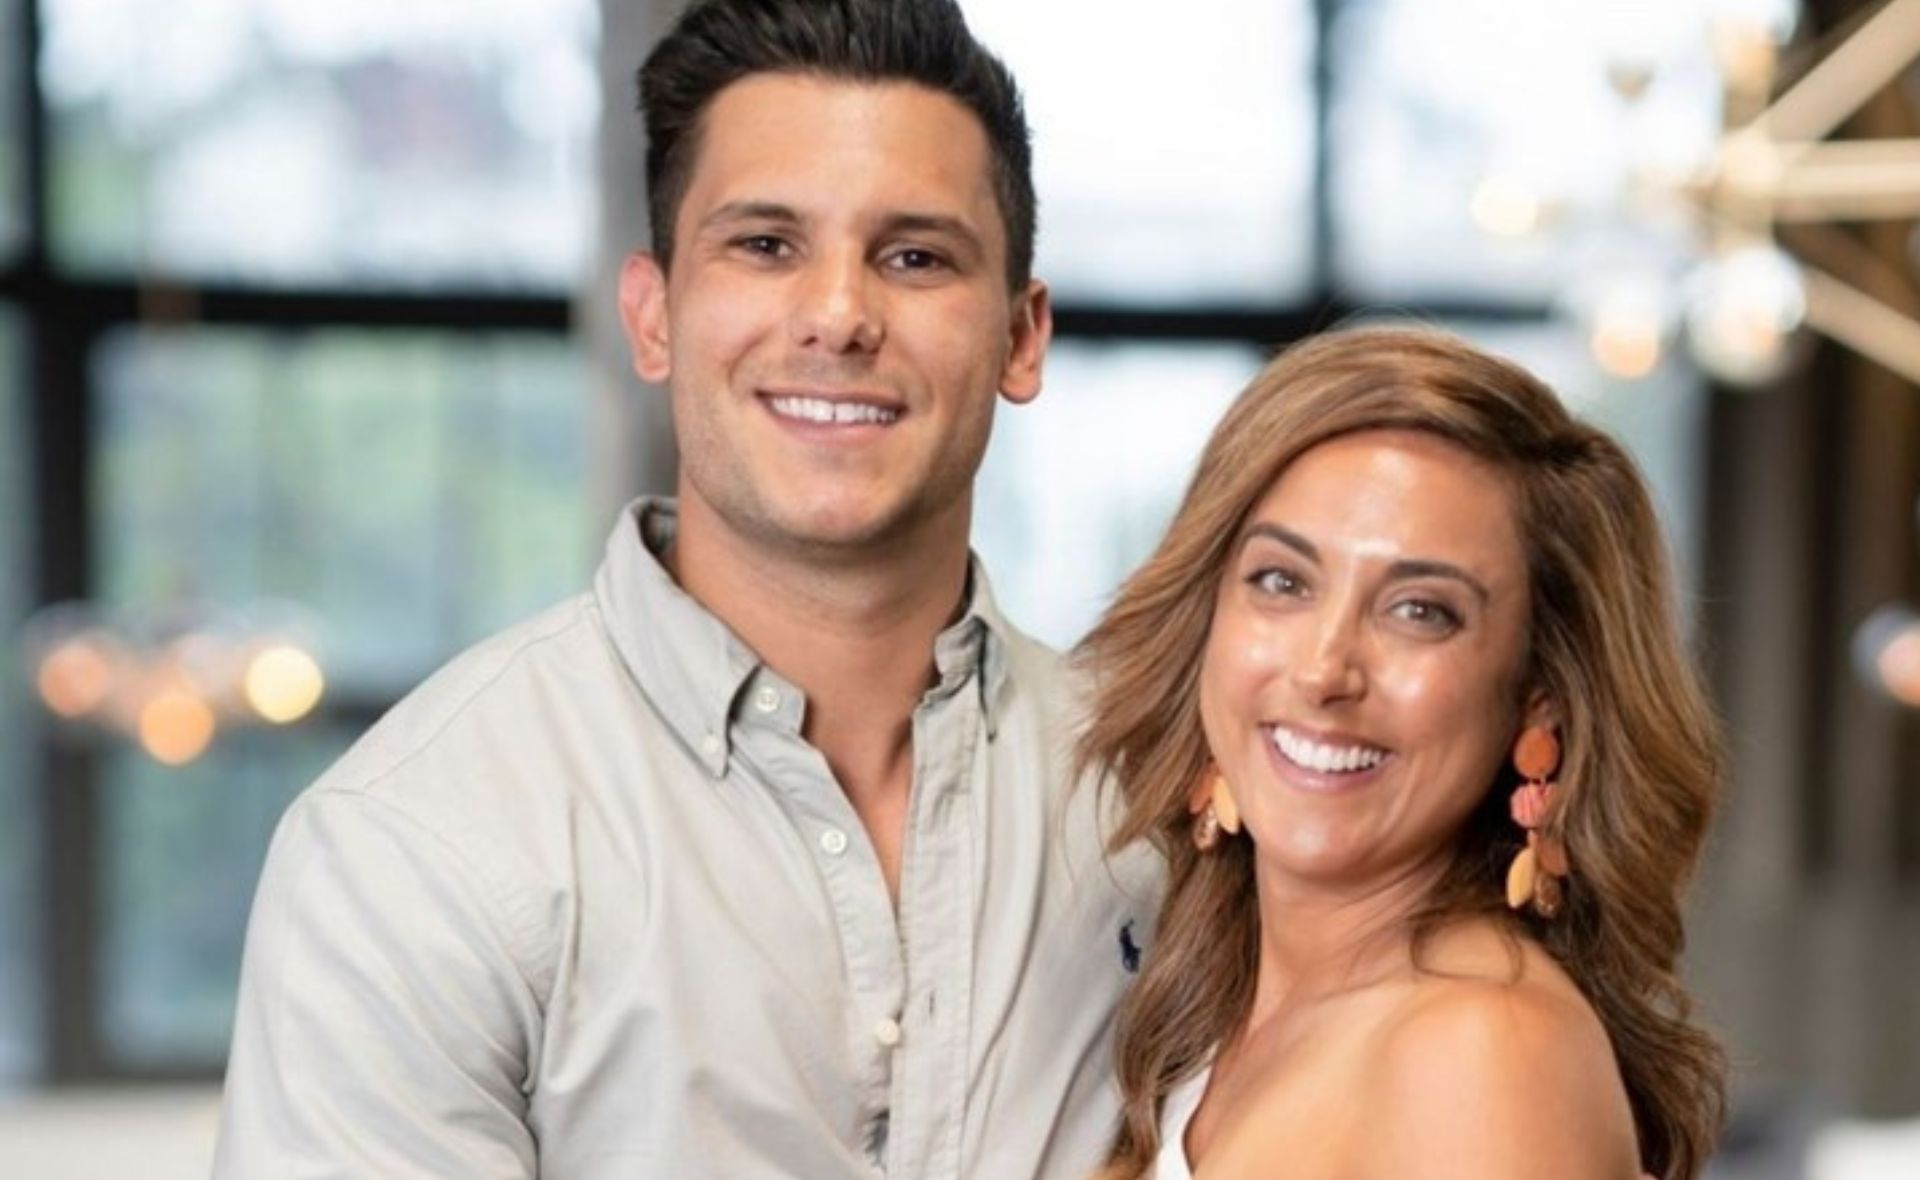 MAFS stars Kerry & Johnny Balbuziente are “thrilled” to be expecting their first child